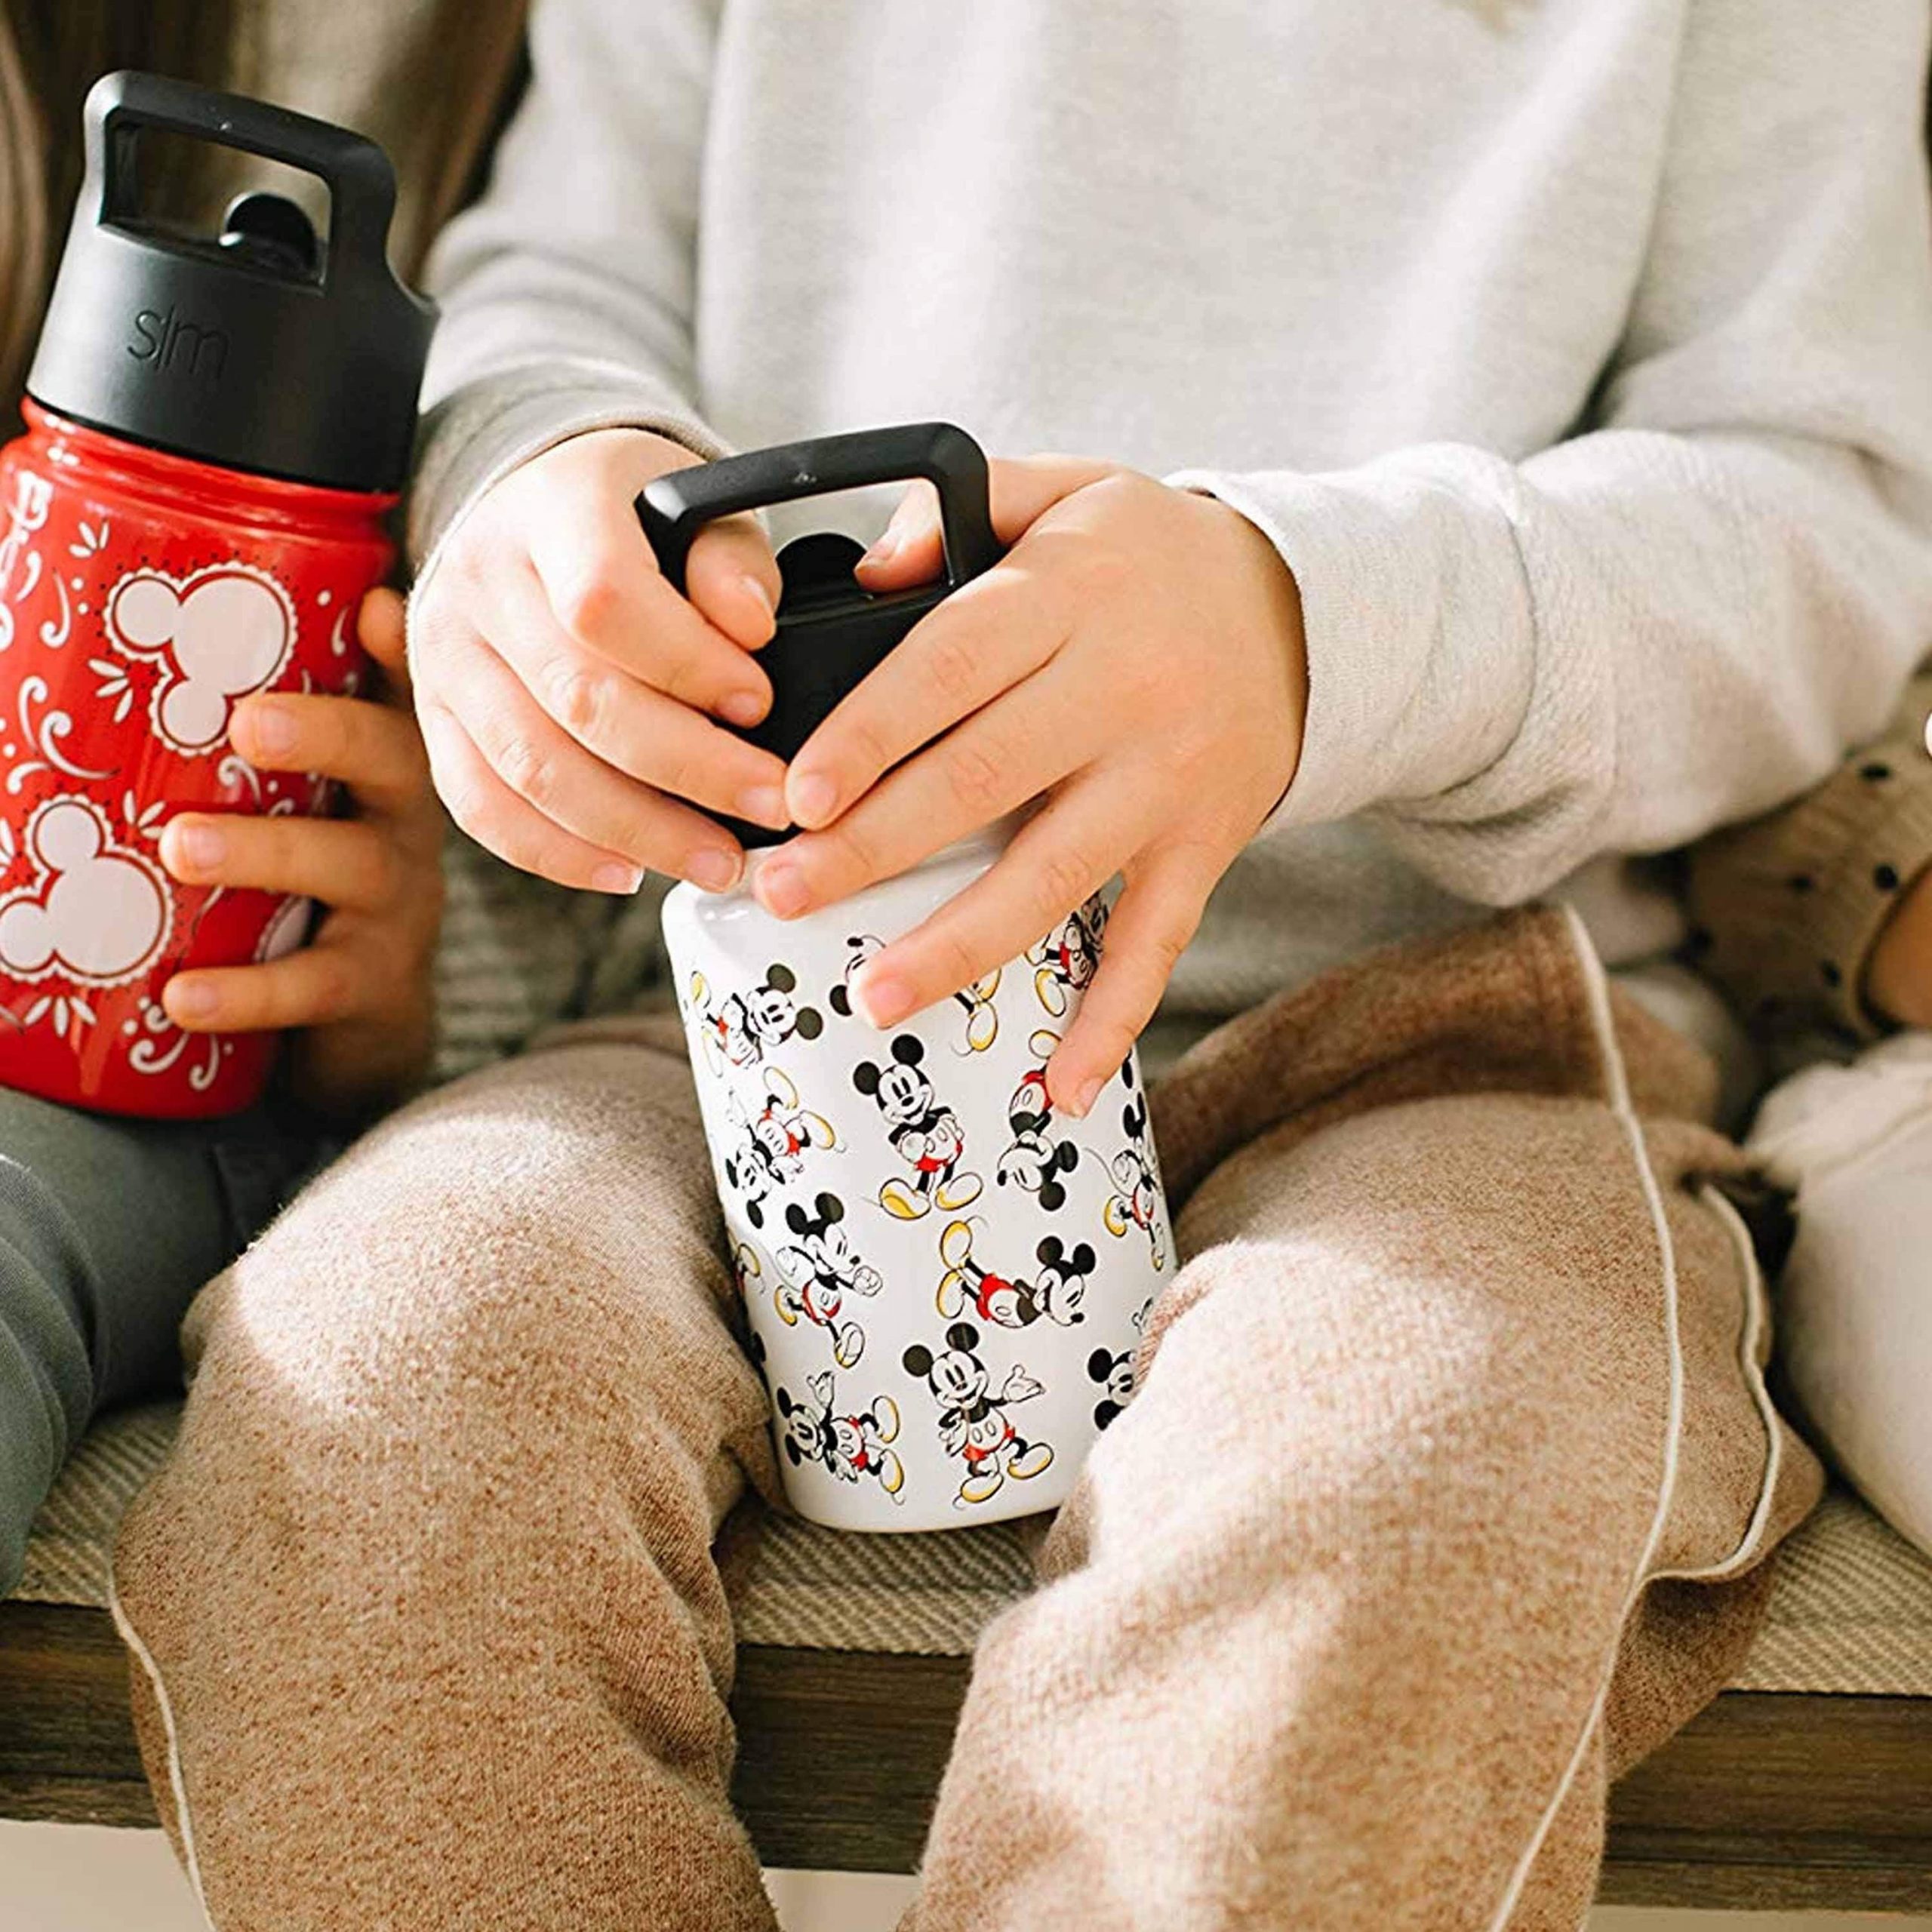 Take a Look at These Disney Themed Water Bottles By Simple Modern - Disney  Fashion Blog